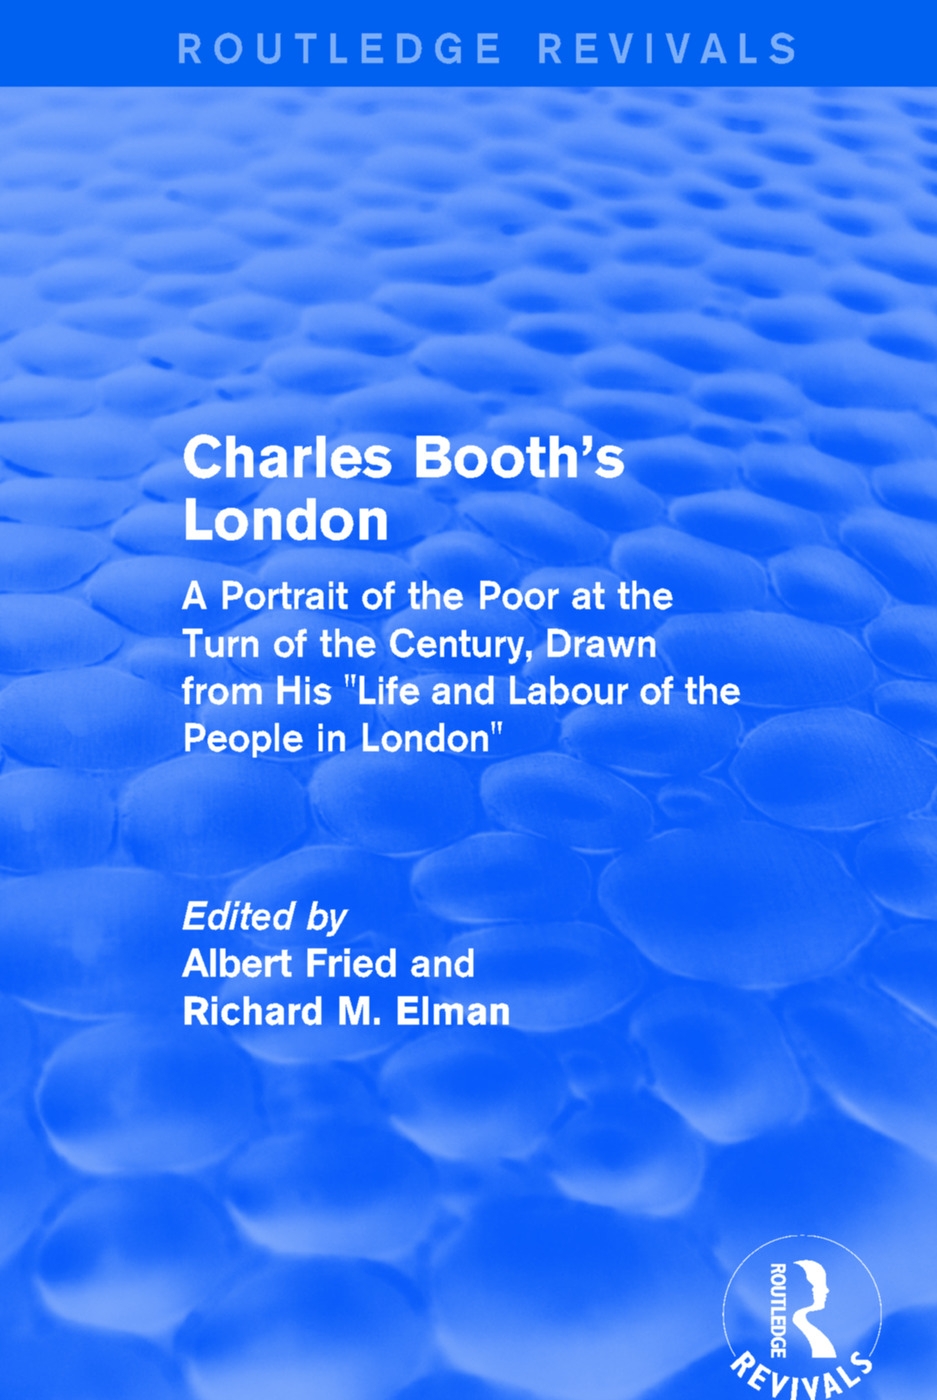 Routledge Revivals: Charles Booth’’s London (1969): A Portrait of the Poor at the Turn of the Century, Drawn from His Life and Labour of the People in